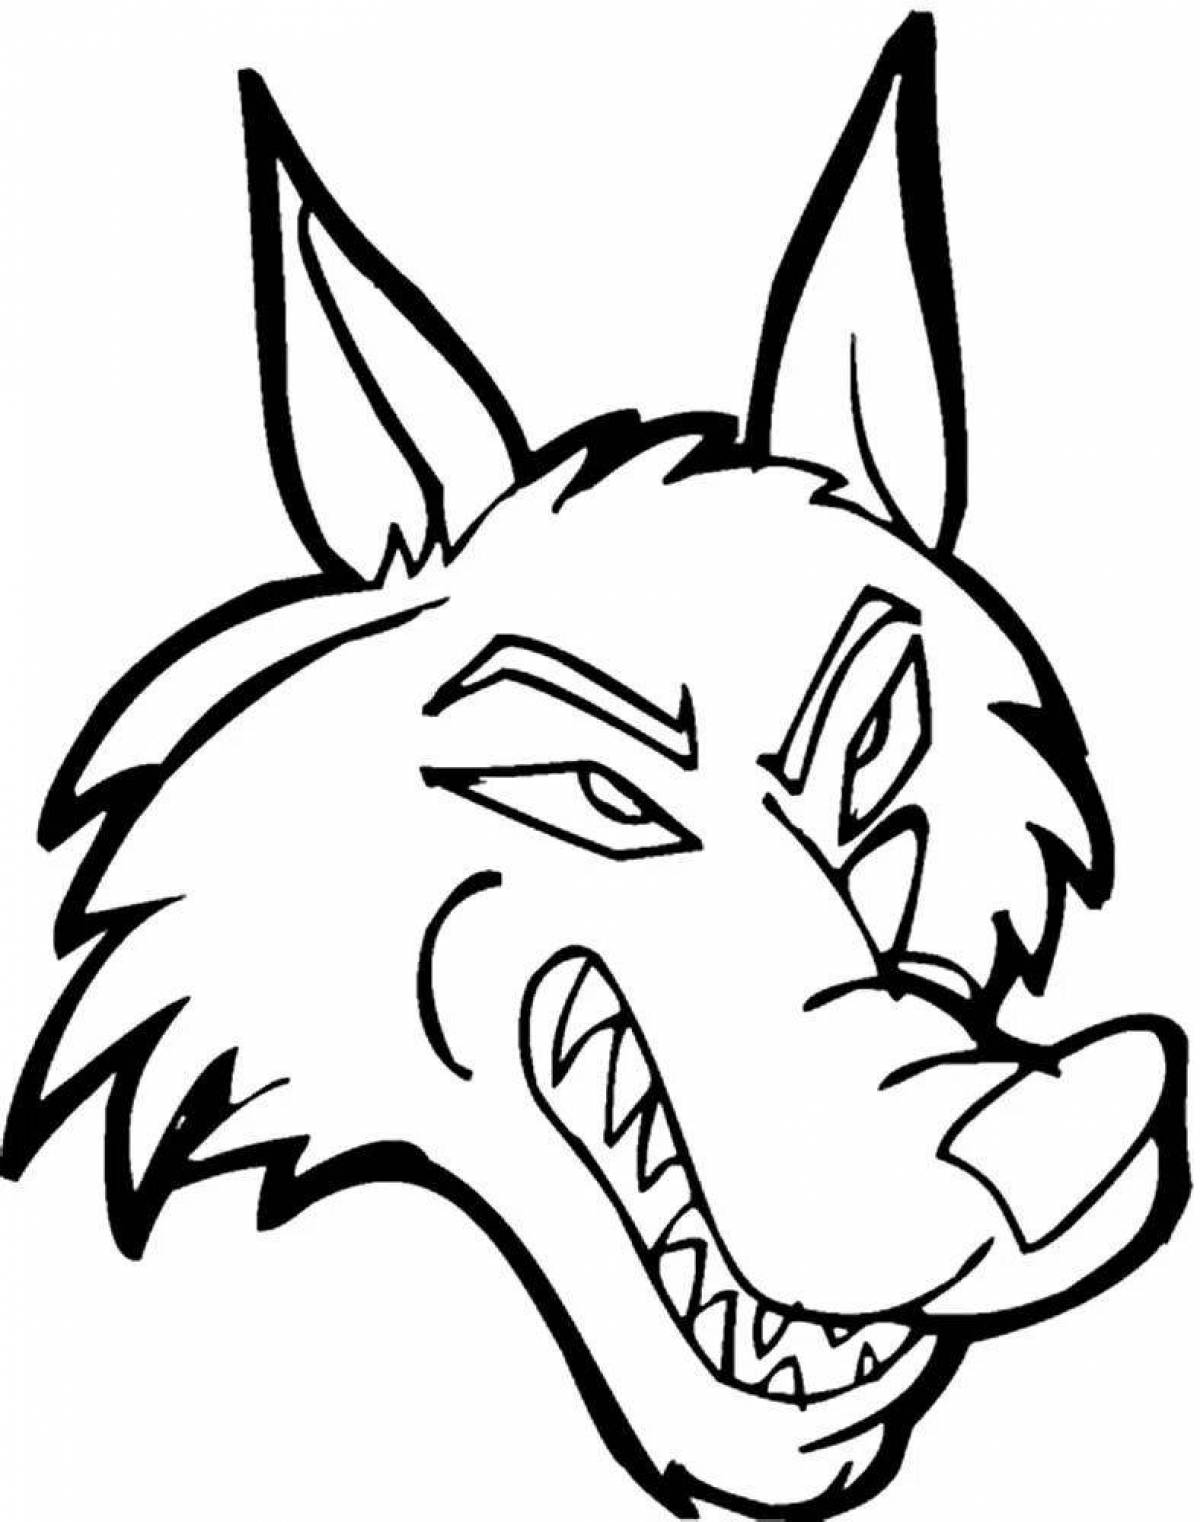 Scary wolf head coloring book